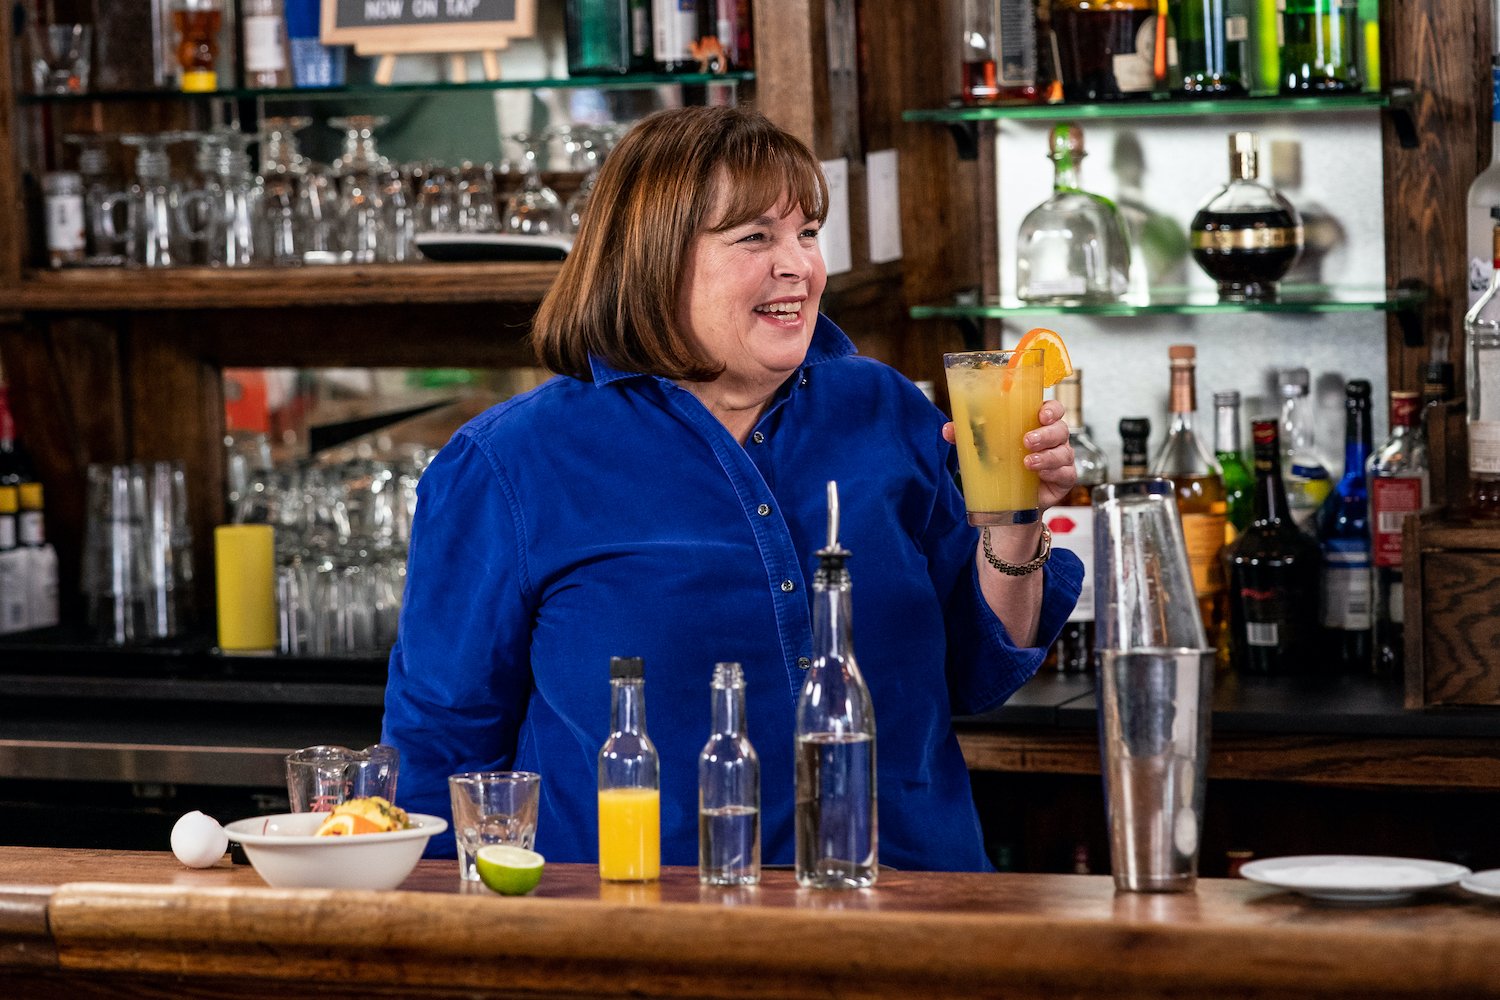 Ina Garten wears a blue shirt and holds a cocktail during 'Seth Goes Day Drinking with Ina Garten' on Late Night With Seth Meyers